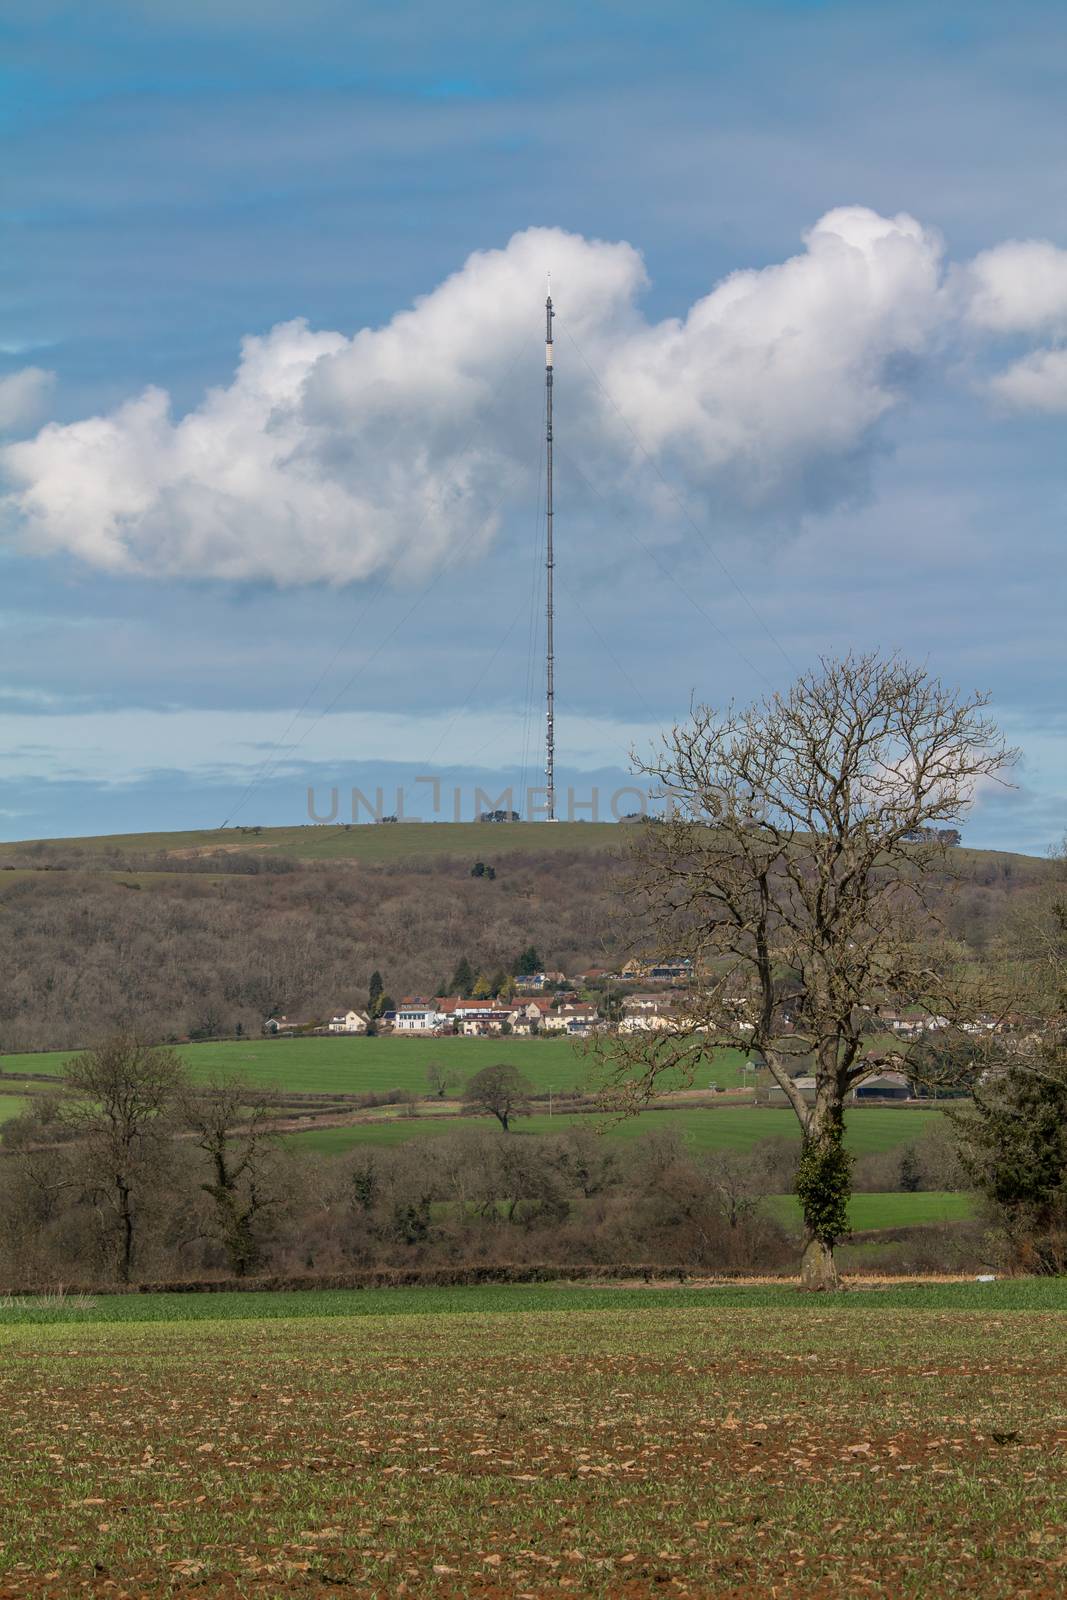 Old analogue TV mast, now used for mobile phone signal, in the middle of a rural setting.